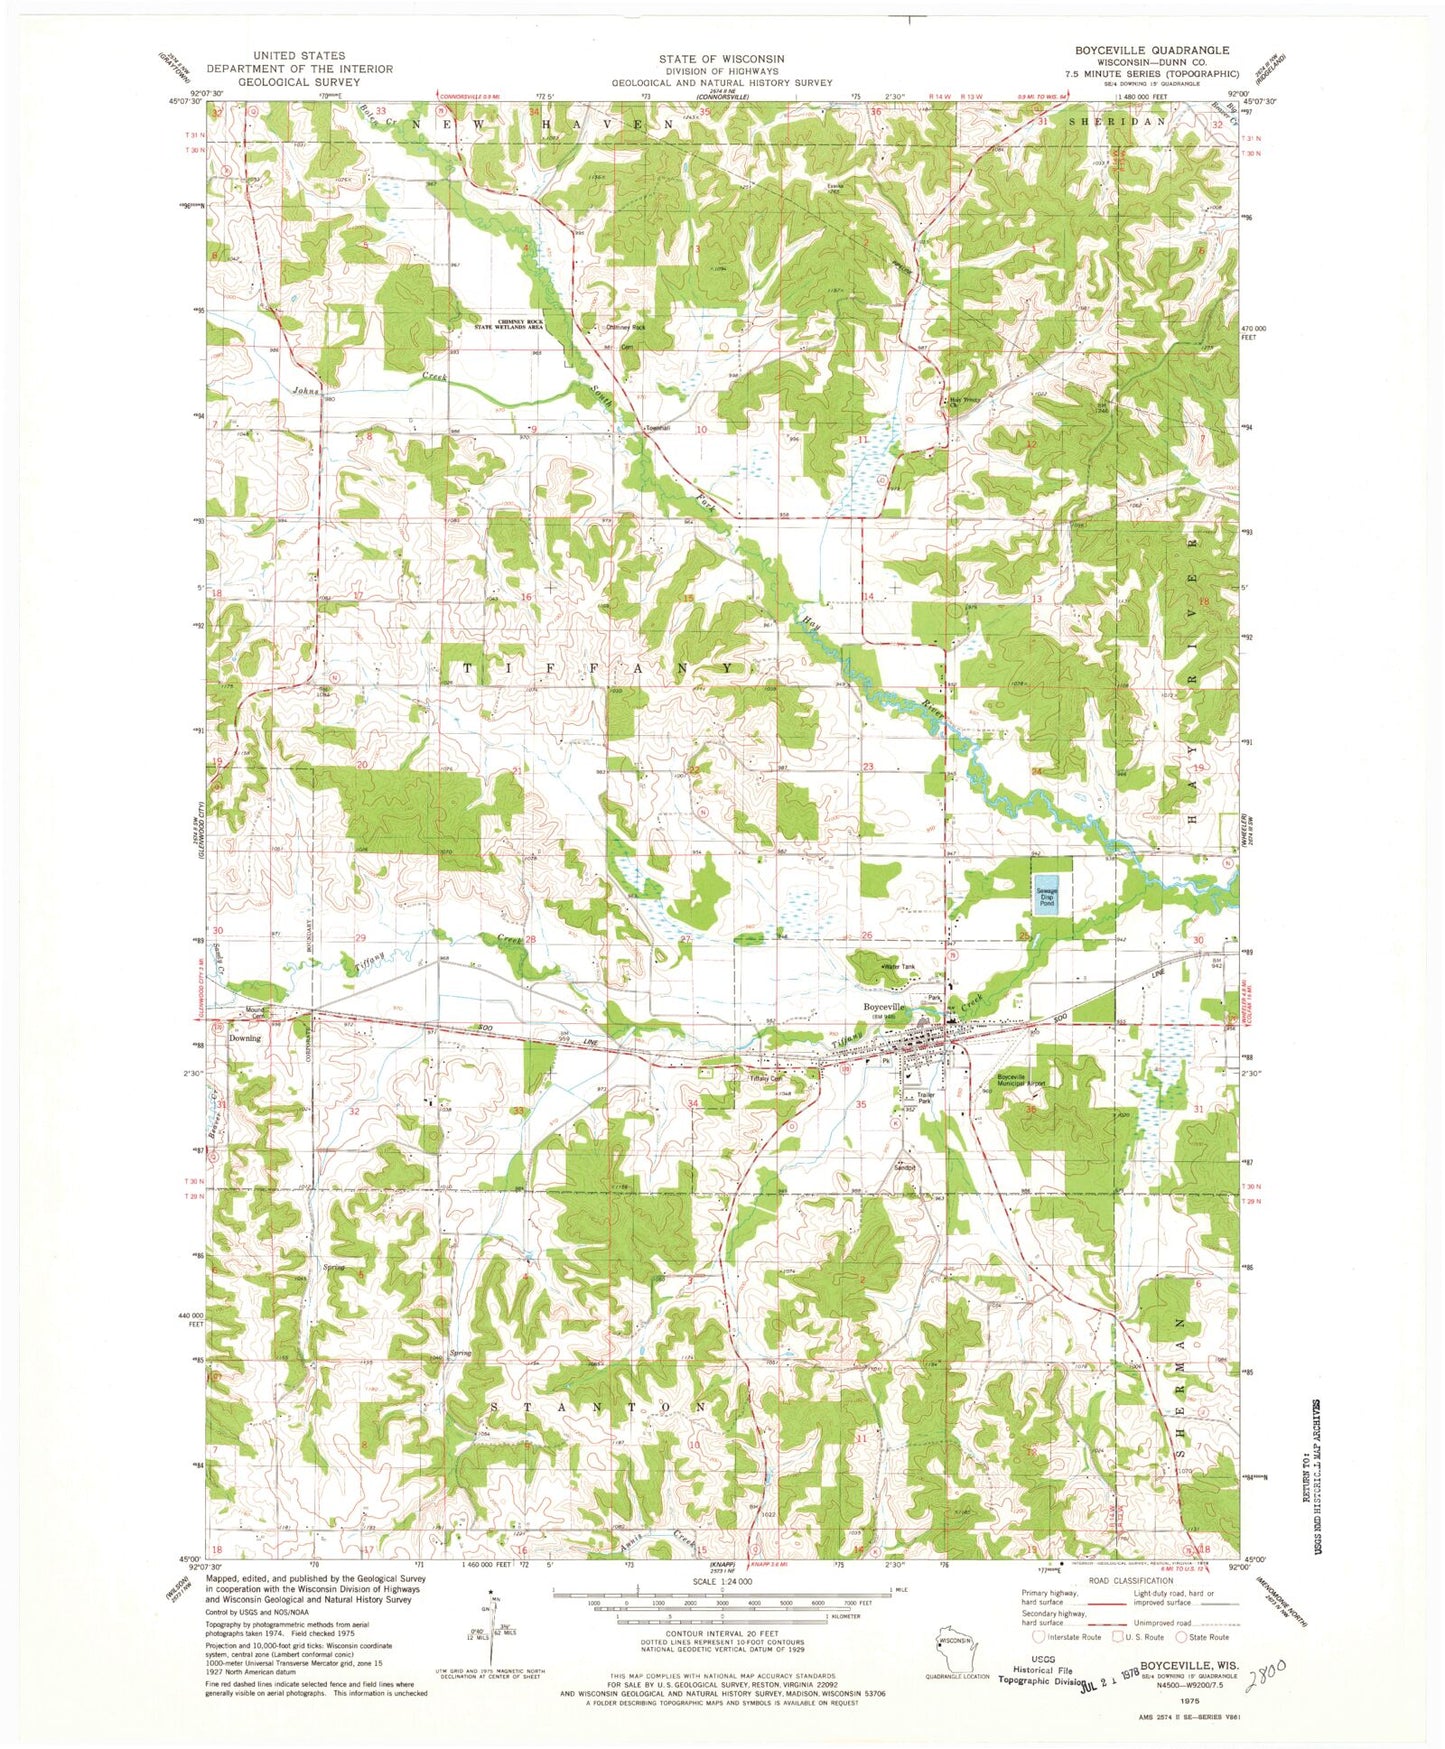 Classic USGS Boyceville Wisconsin 7.5'x7.5' Topo Map Image